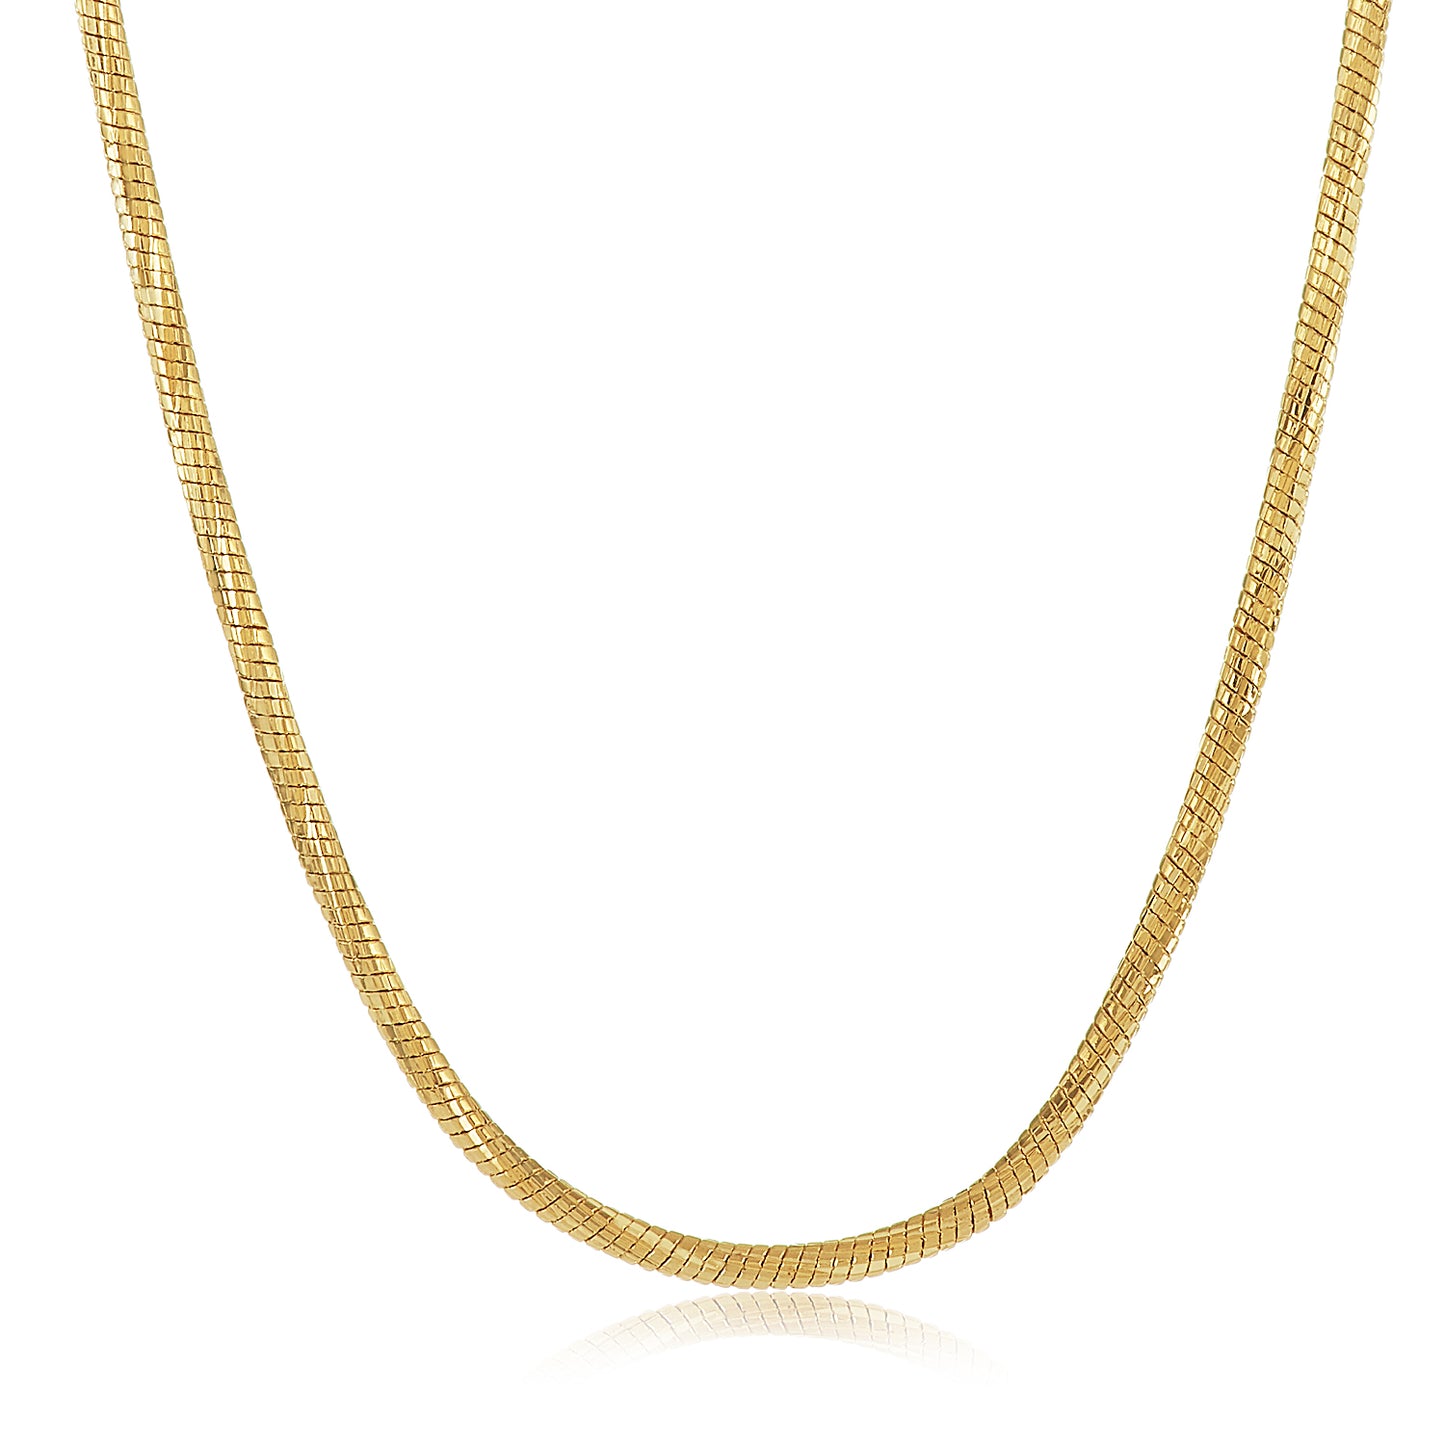 1.5mm-2mm 14k Gold Plated Round Diamond-Cut Snake Chain Necklace or Bracelet 7-30" Made in USA (SKU: GL-SNAKE-CHAINS)